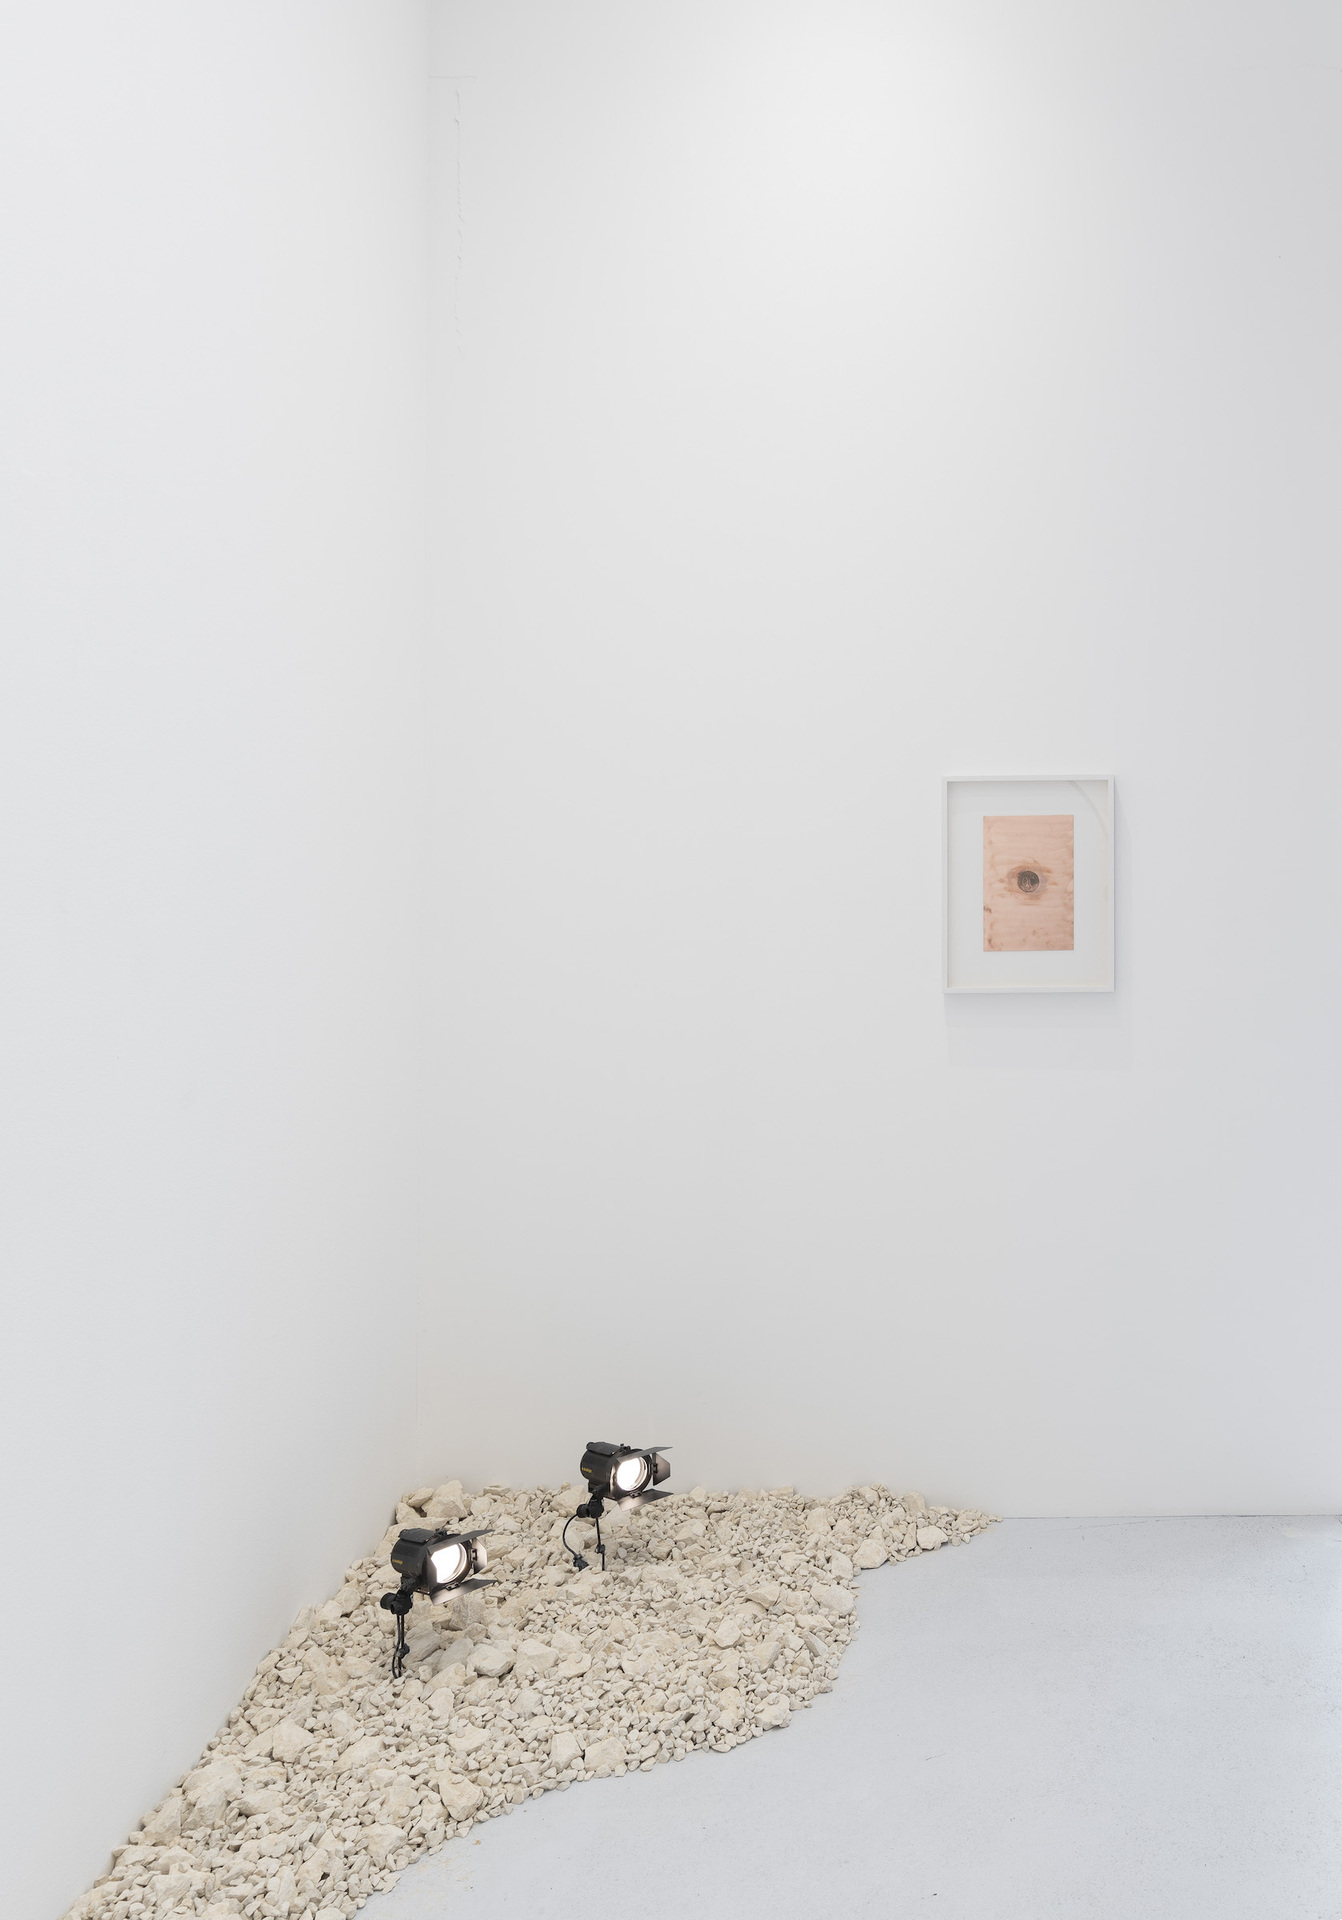 Installation view chasing another tomorrow, max goelitz, 2020 | Photo: Dirk Tacke